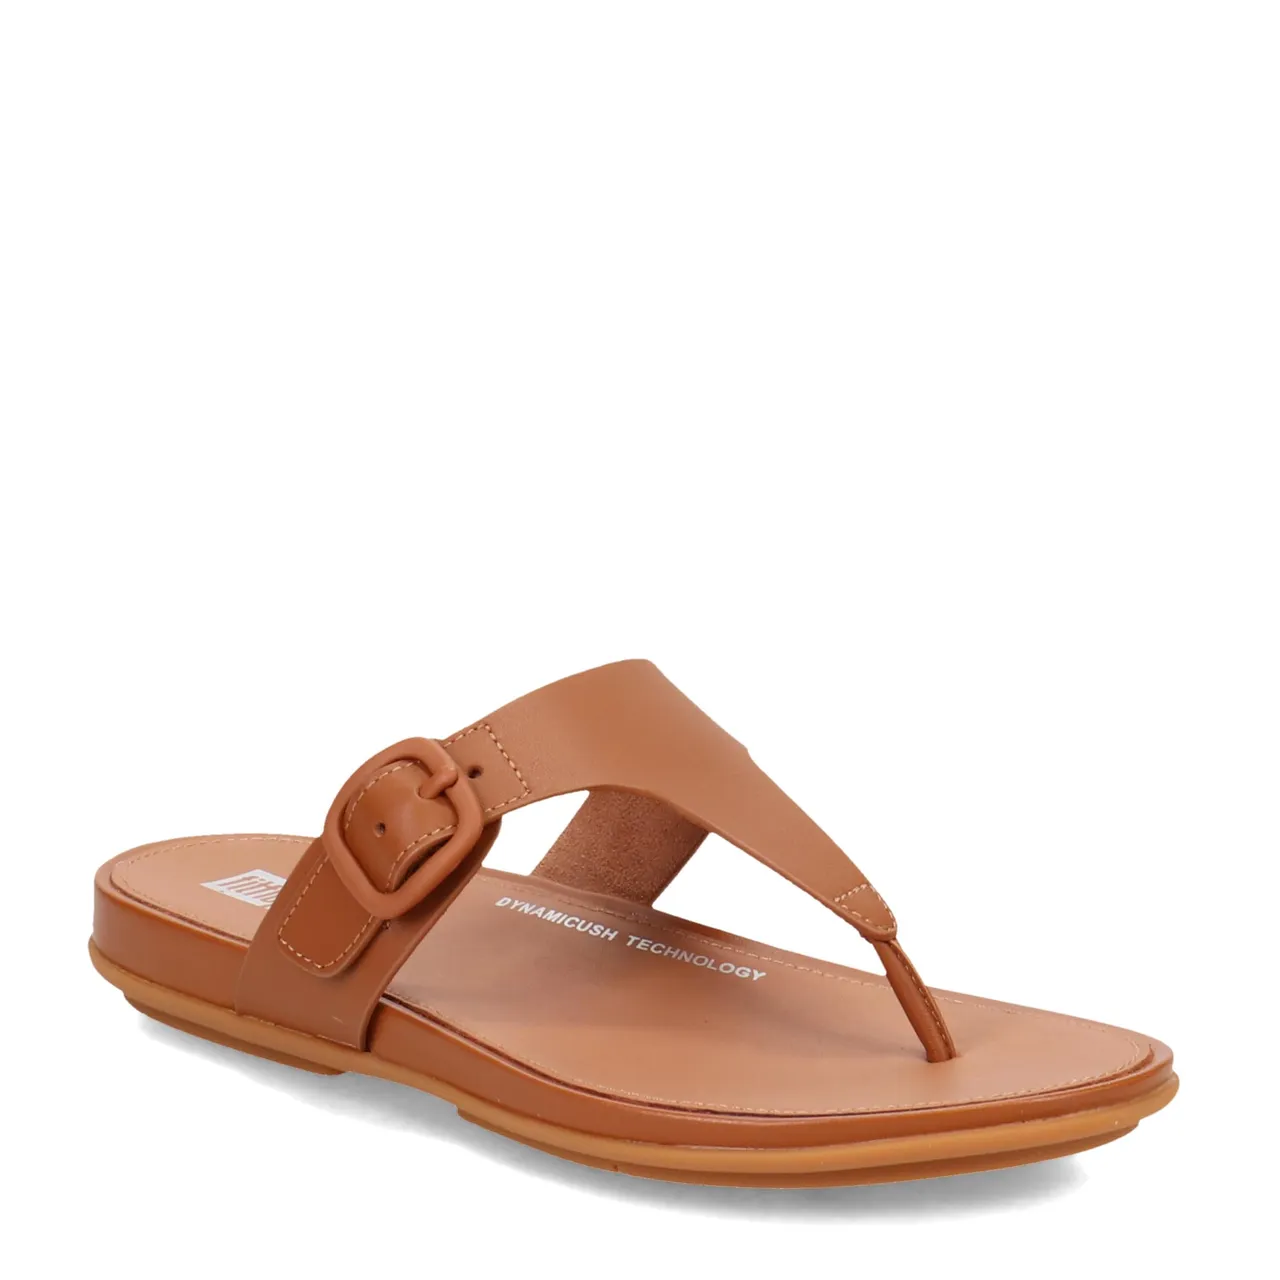 Fitflop Women's Gracie Rubber-Buckle Leather Toe-Post